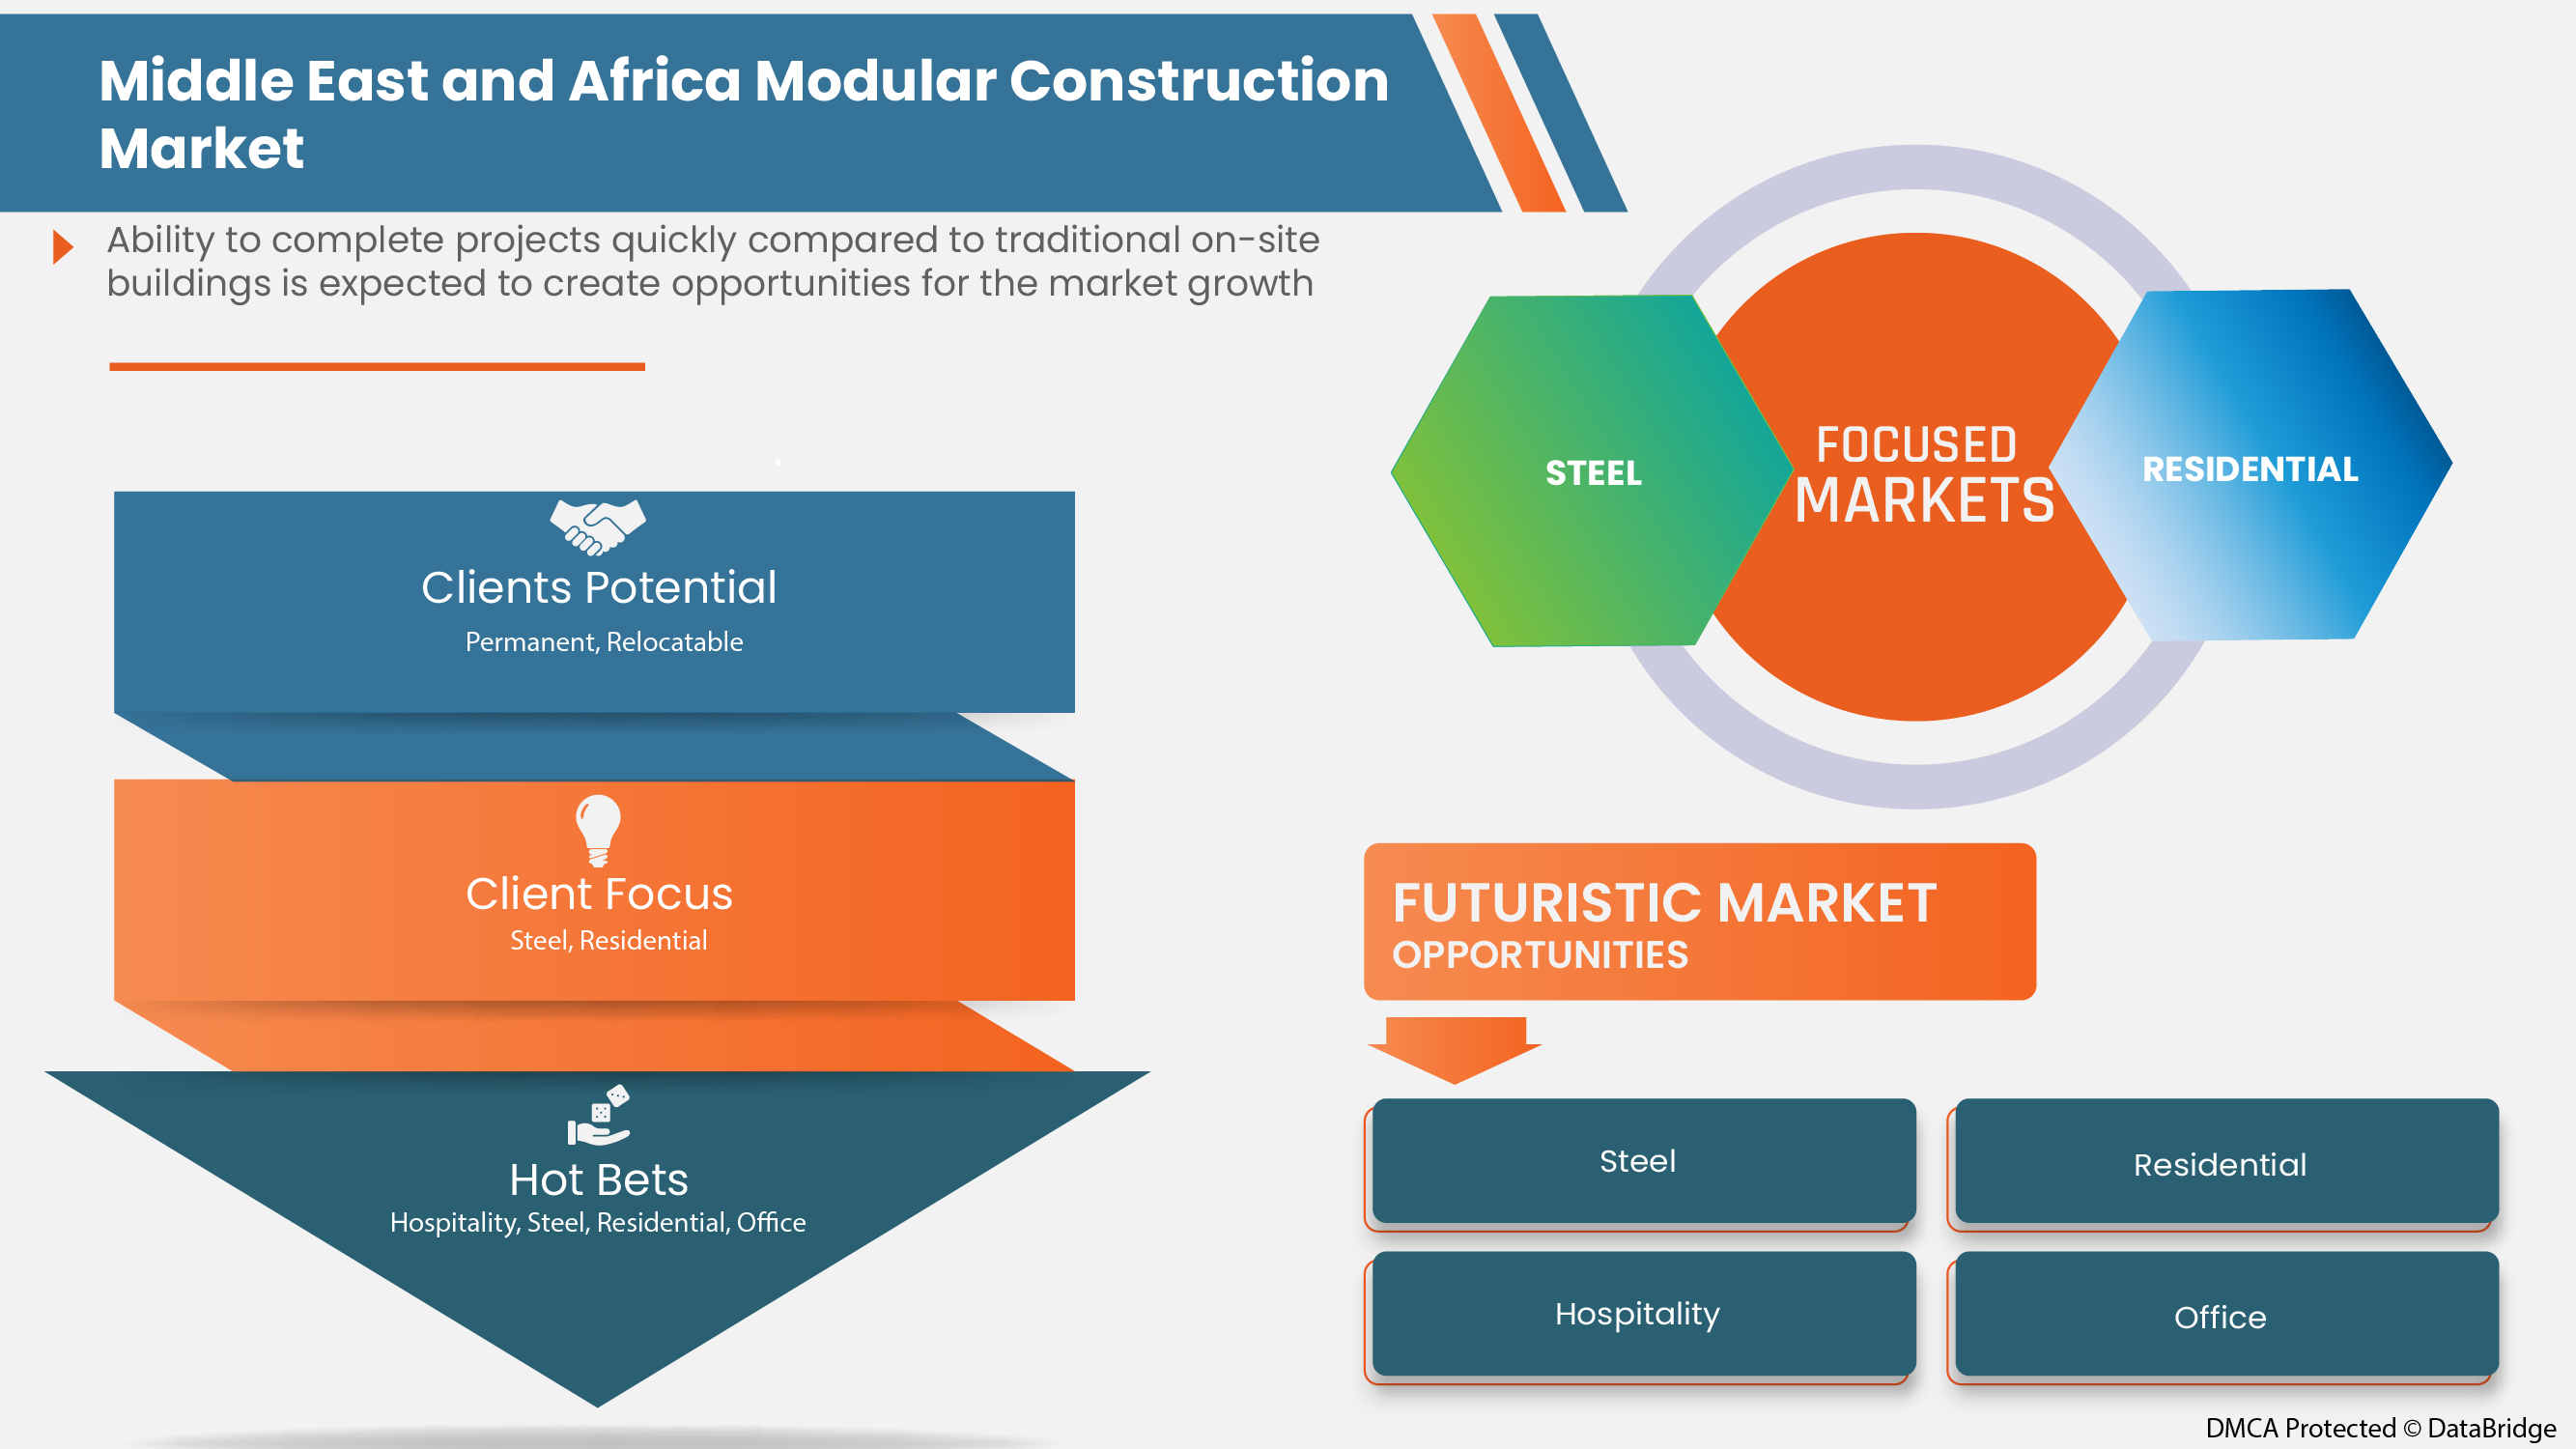 Middle East and Africa Modular Construction Market